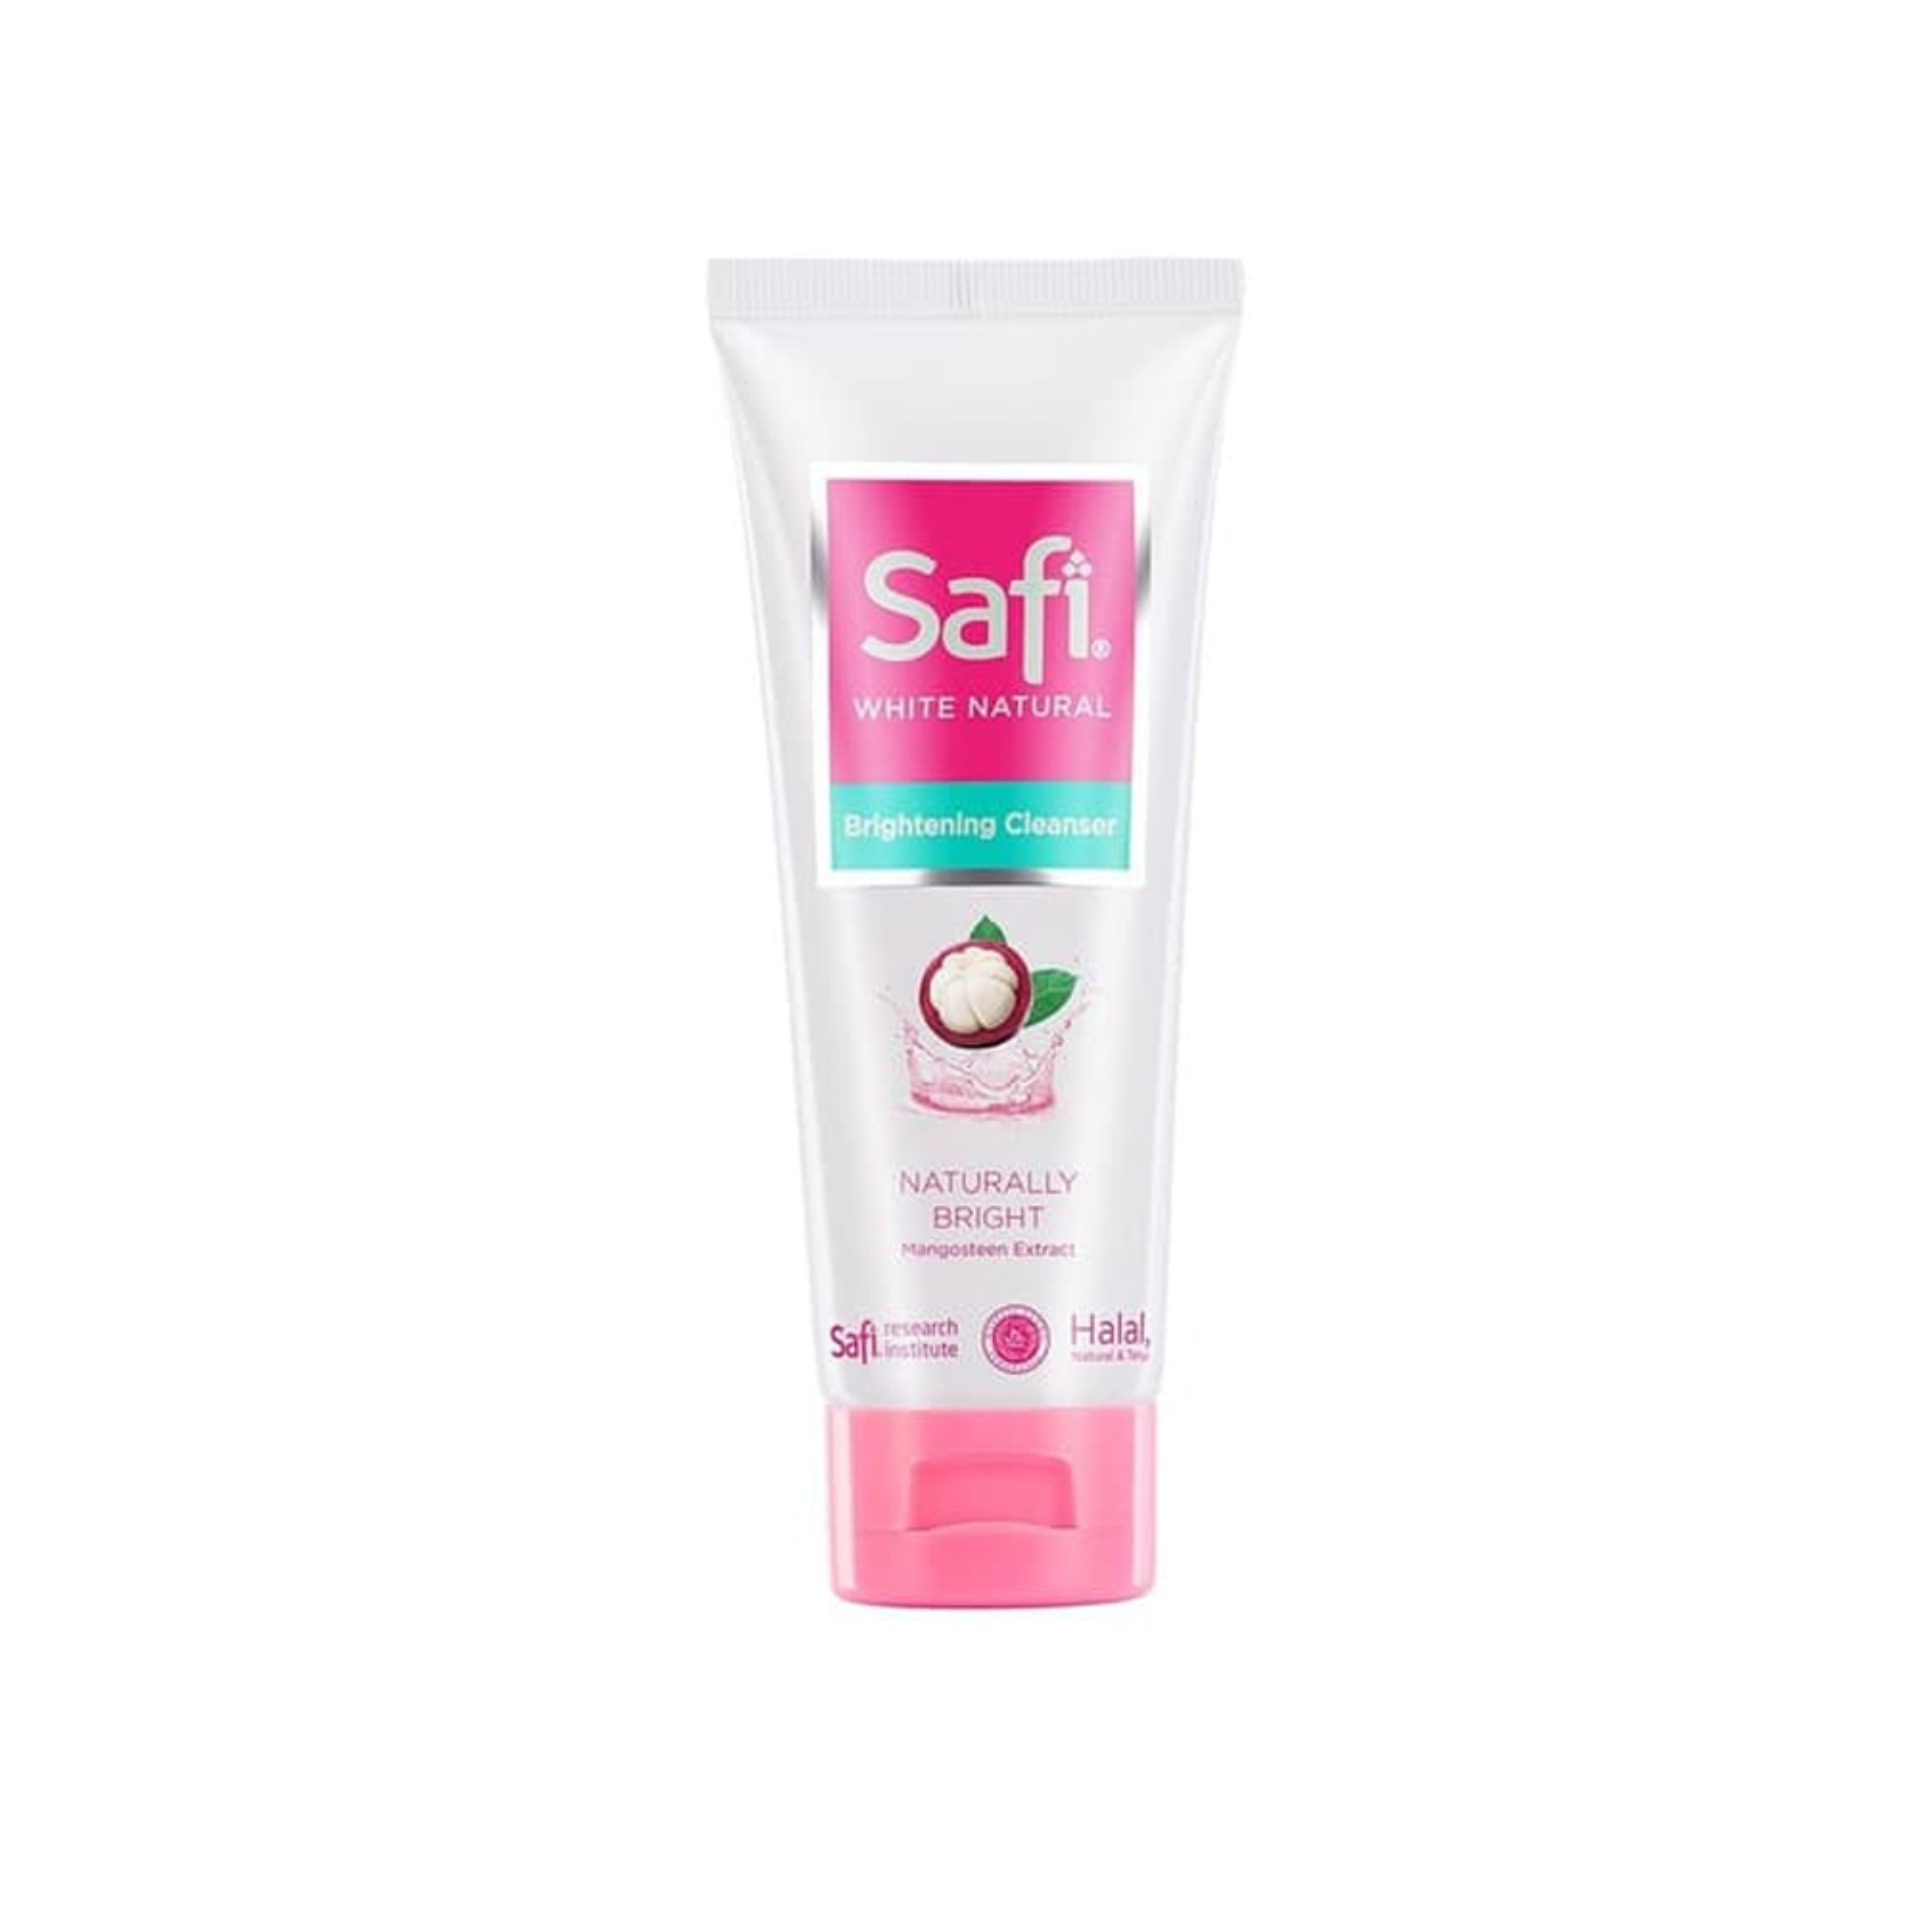 Safi White Natural Brightening Cleanser Mangosteen Extract 50 gr / 100 gr / Face Wash / Face Cleanser Safi / Pembersih Wajah Safi